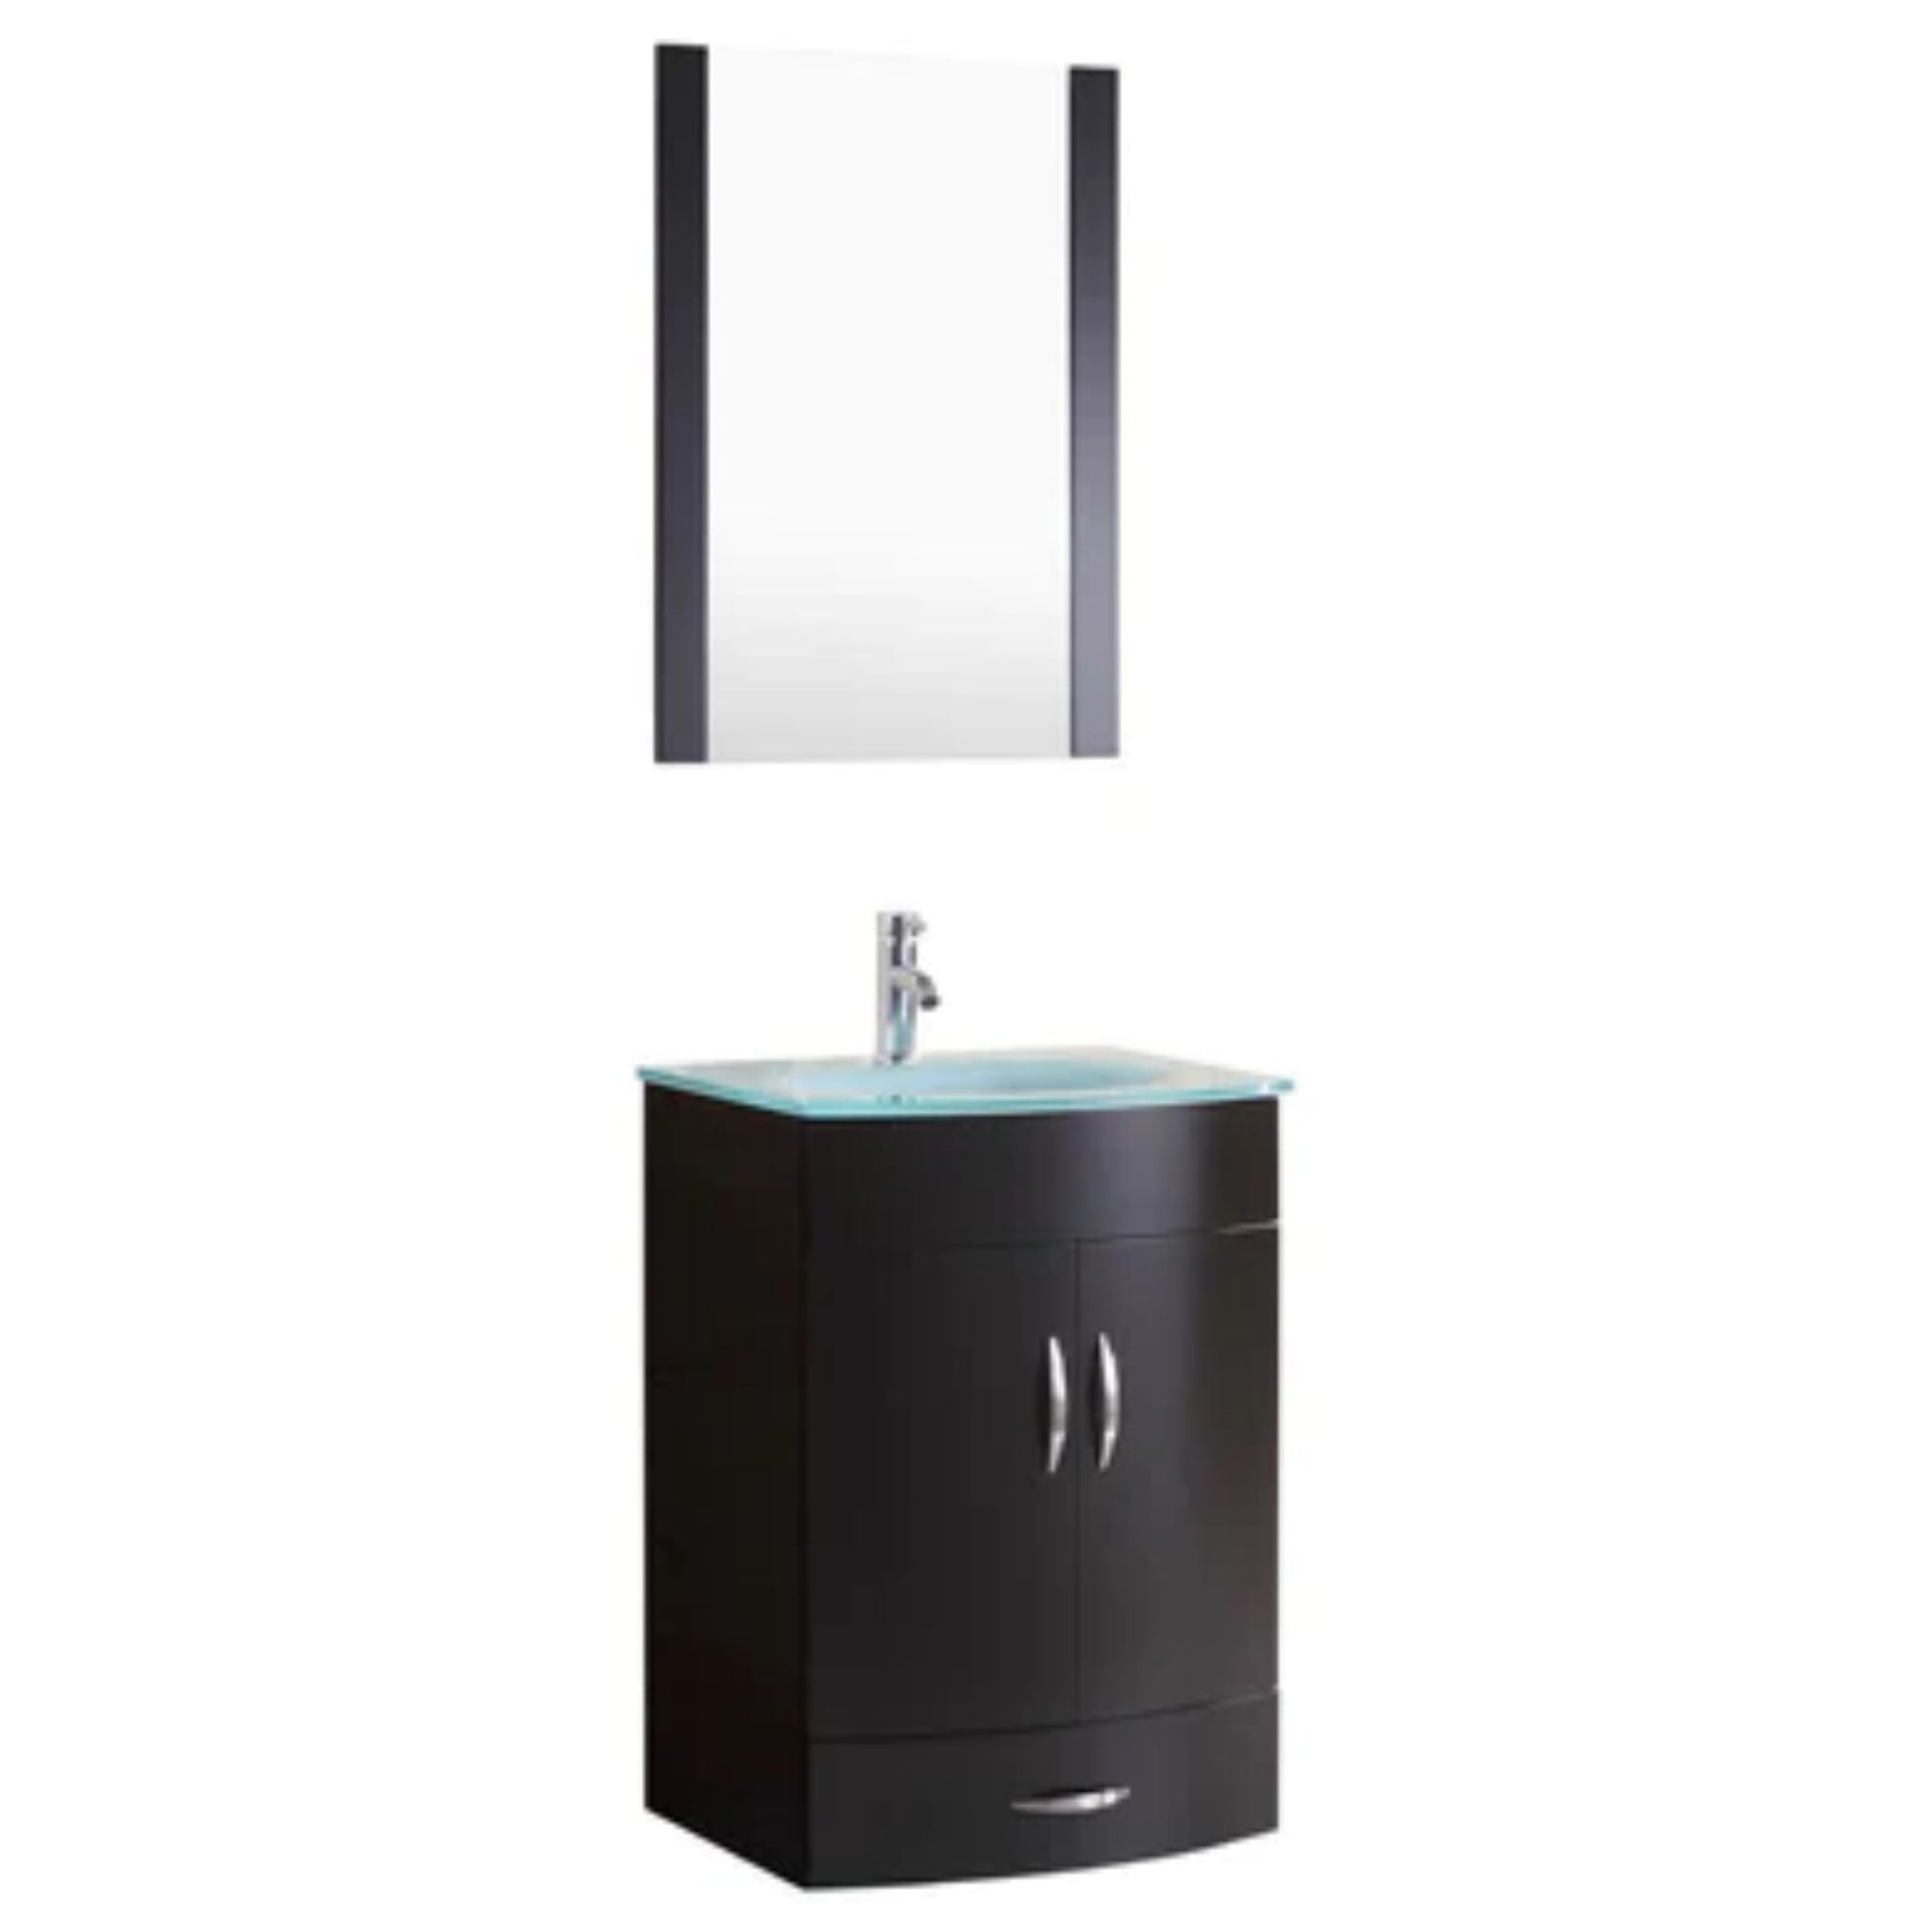 LessCare 24" Black Vanity Sink Base Cabinet with Mirror - Style 5